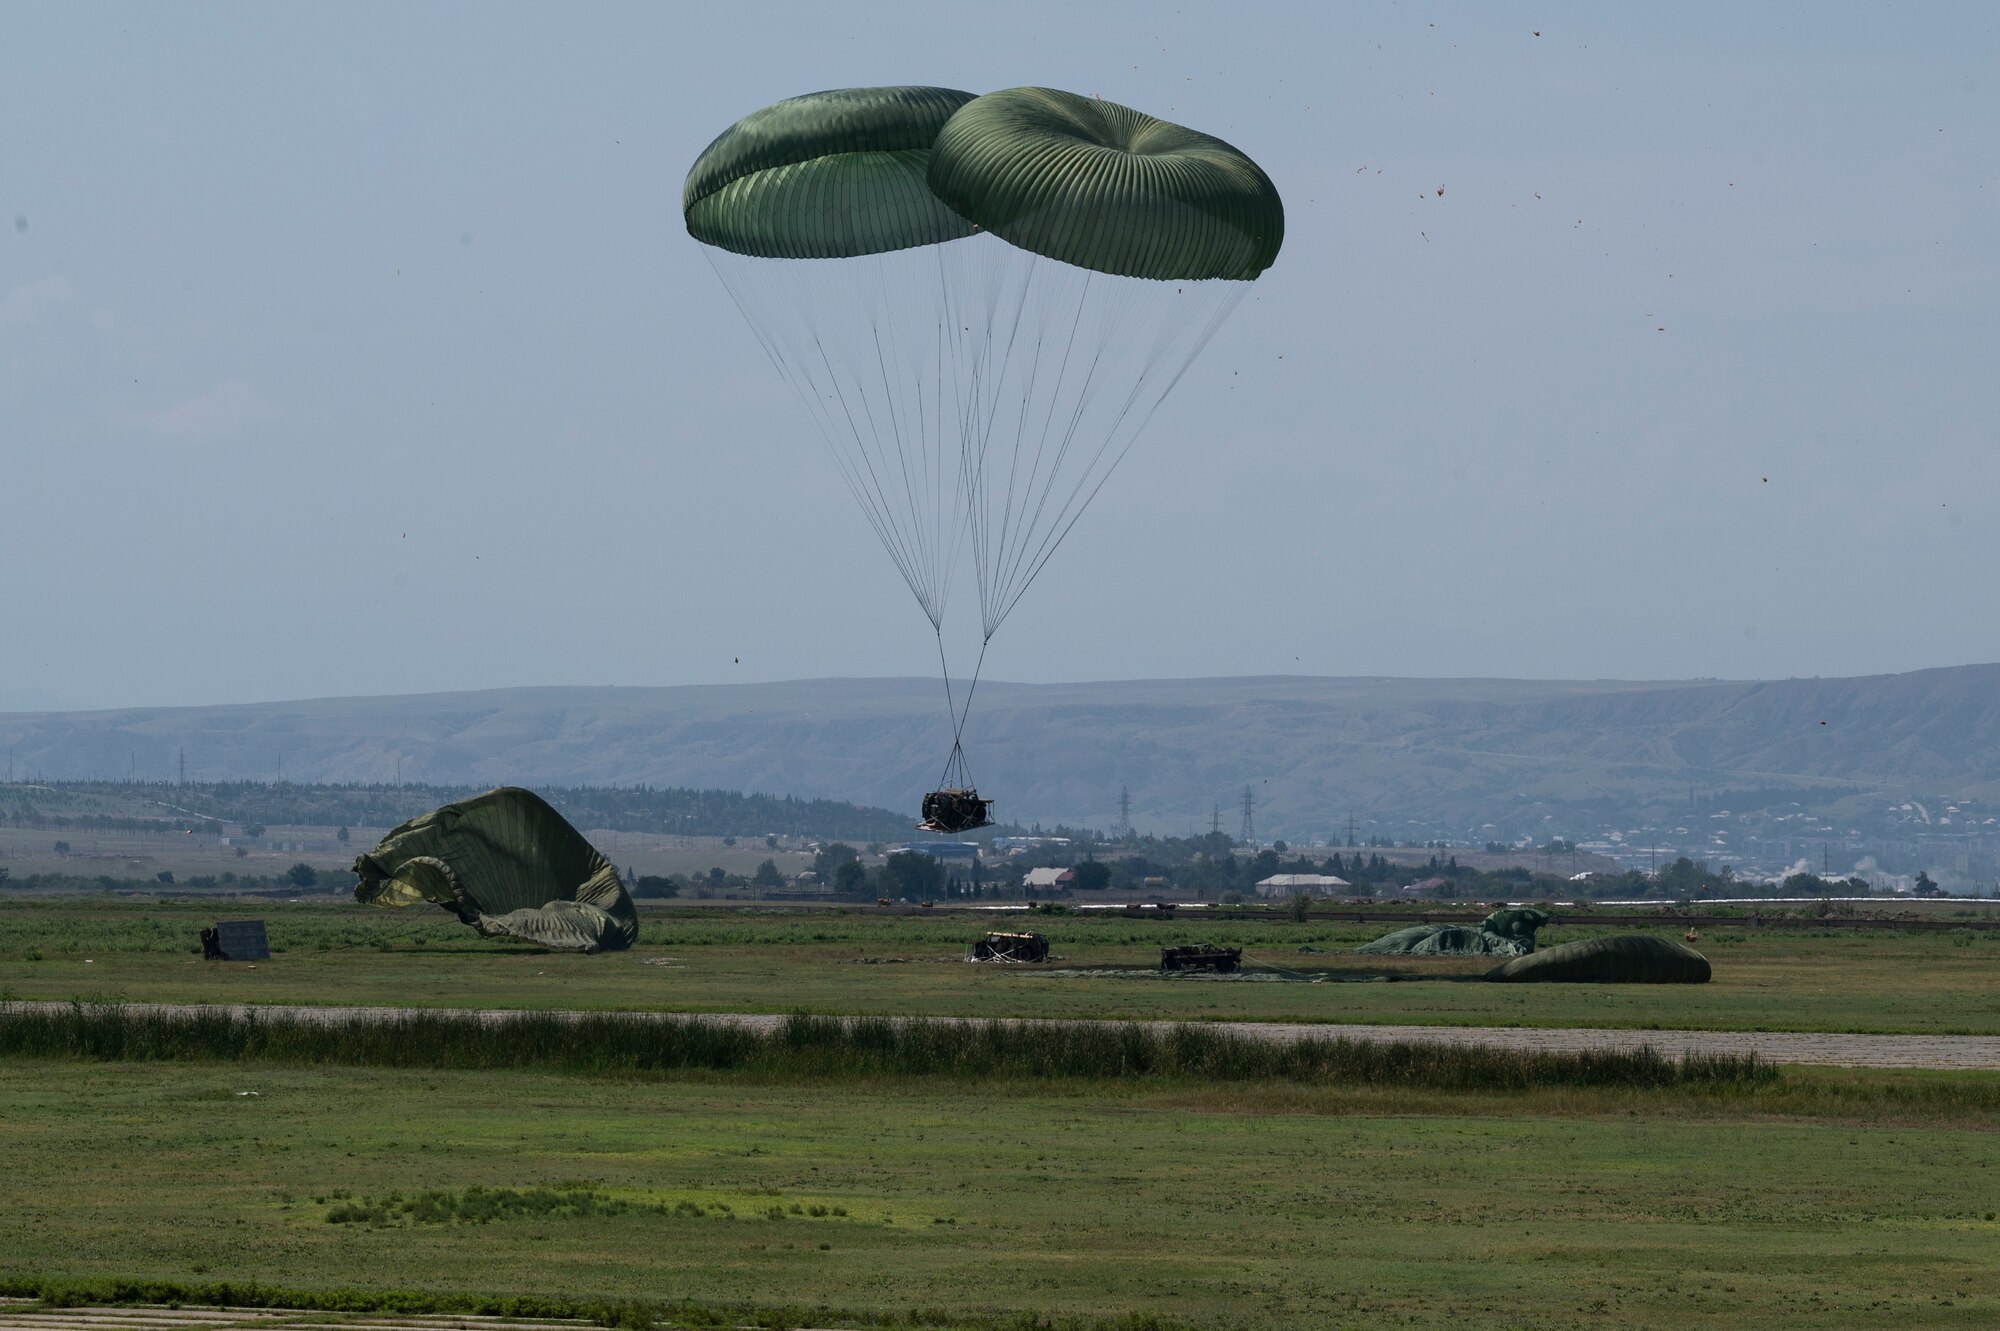 Heavy cargo descends to the ground after being parachuted out of a U.S. Air Force C-130J Super Hercules aircraft during exercise Agile Spirit 21